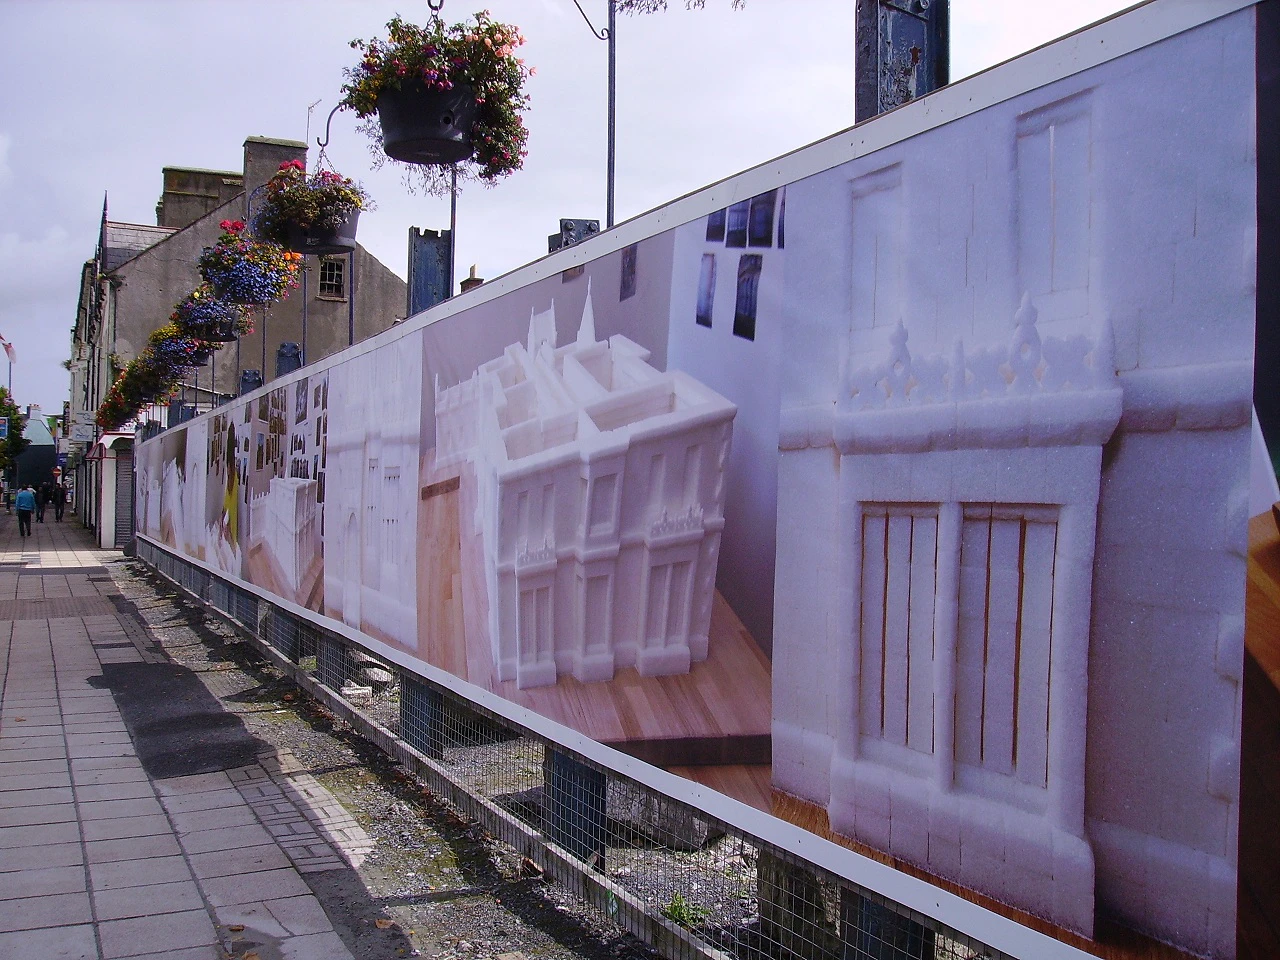 ART ON THE SEAFRONT (2011)